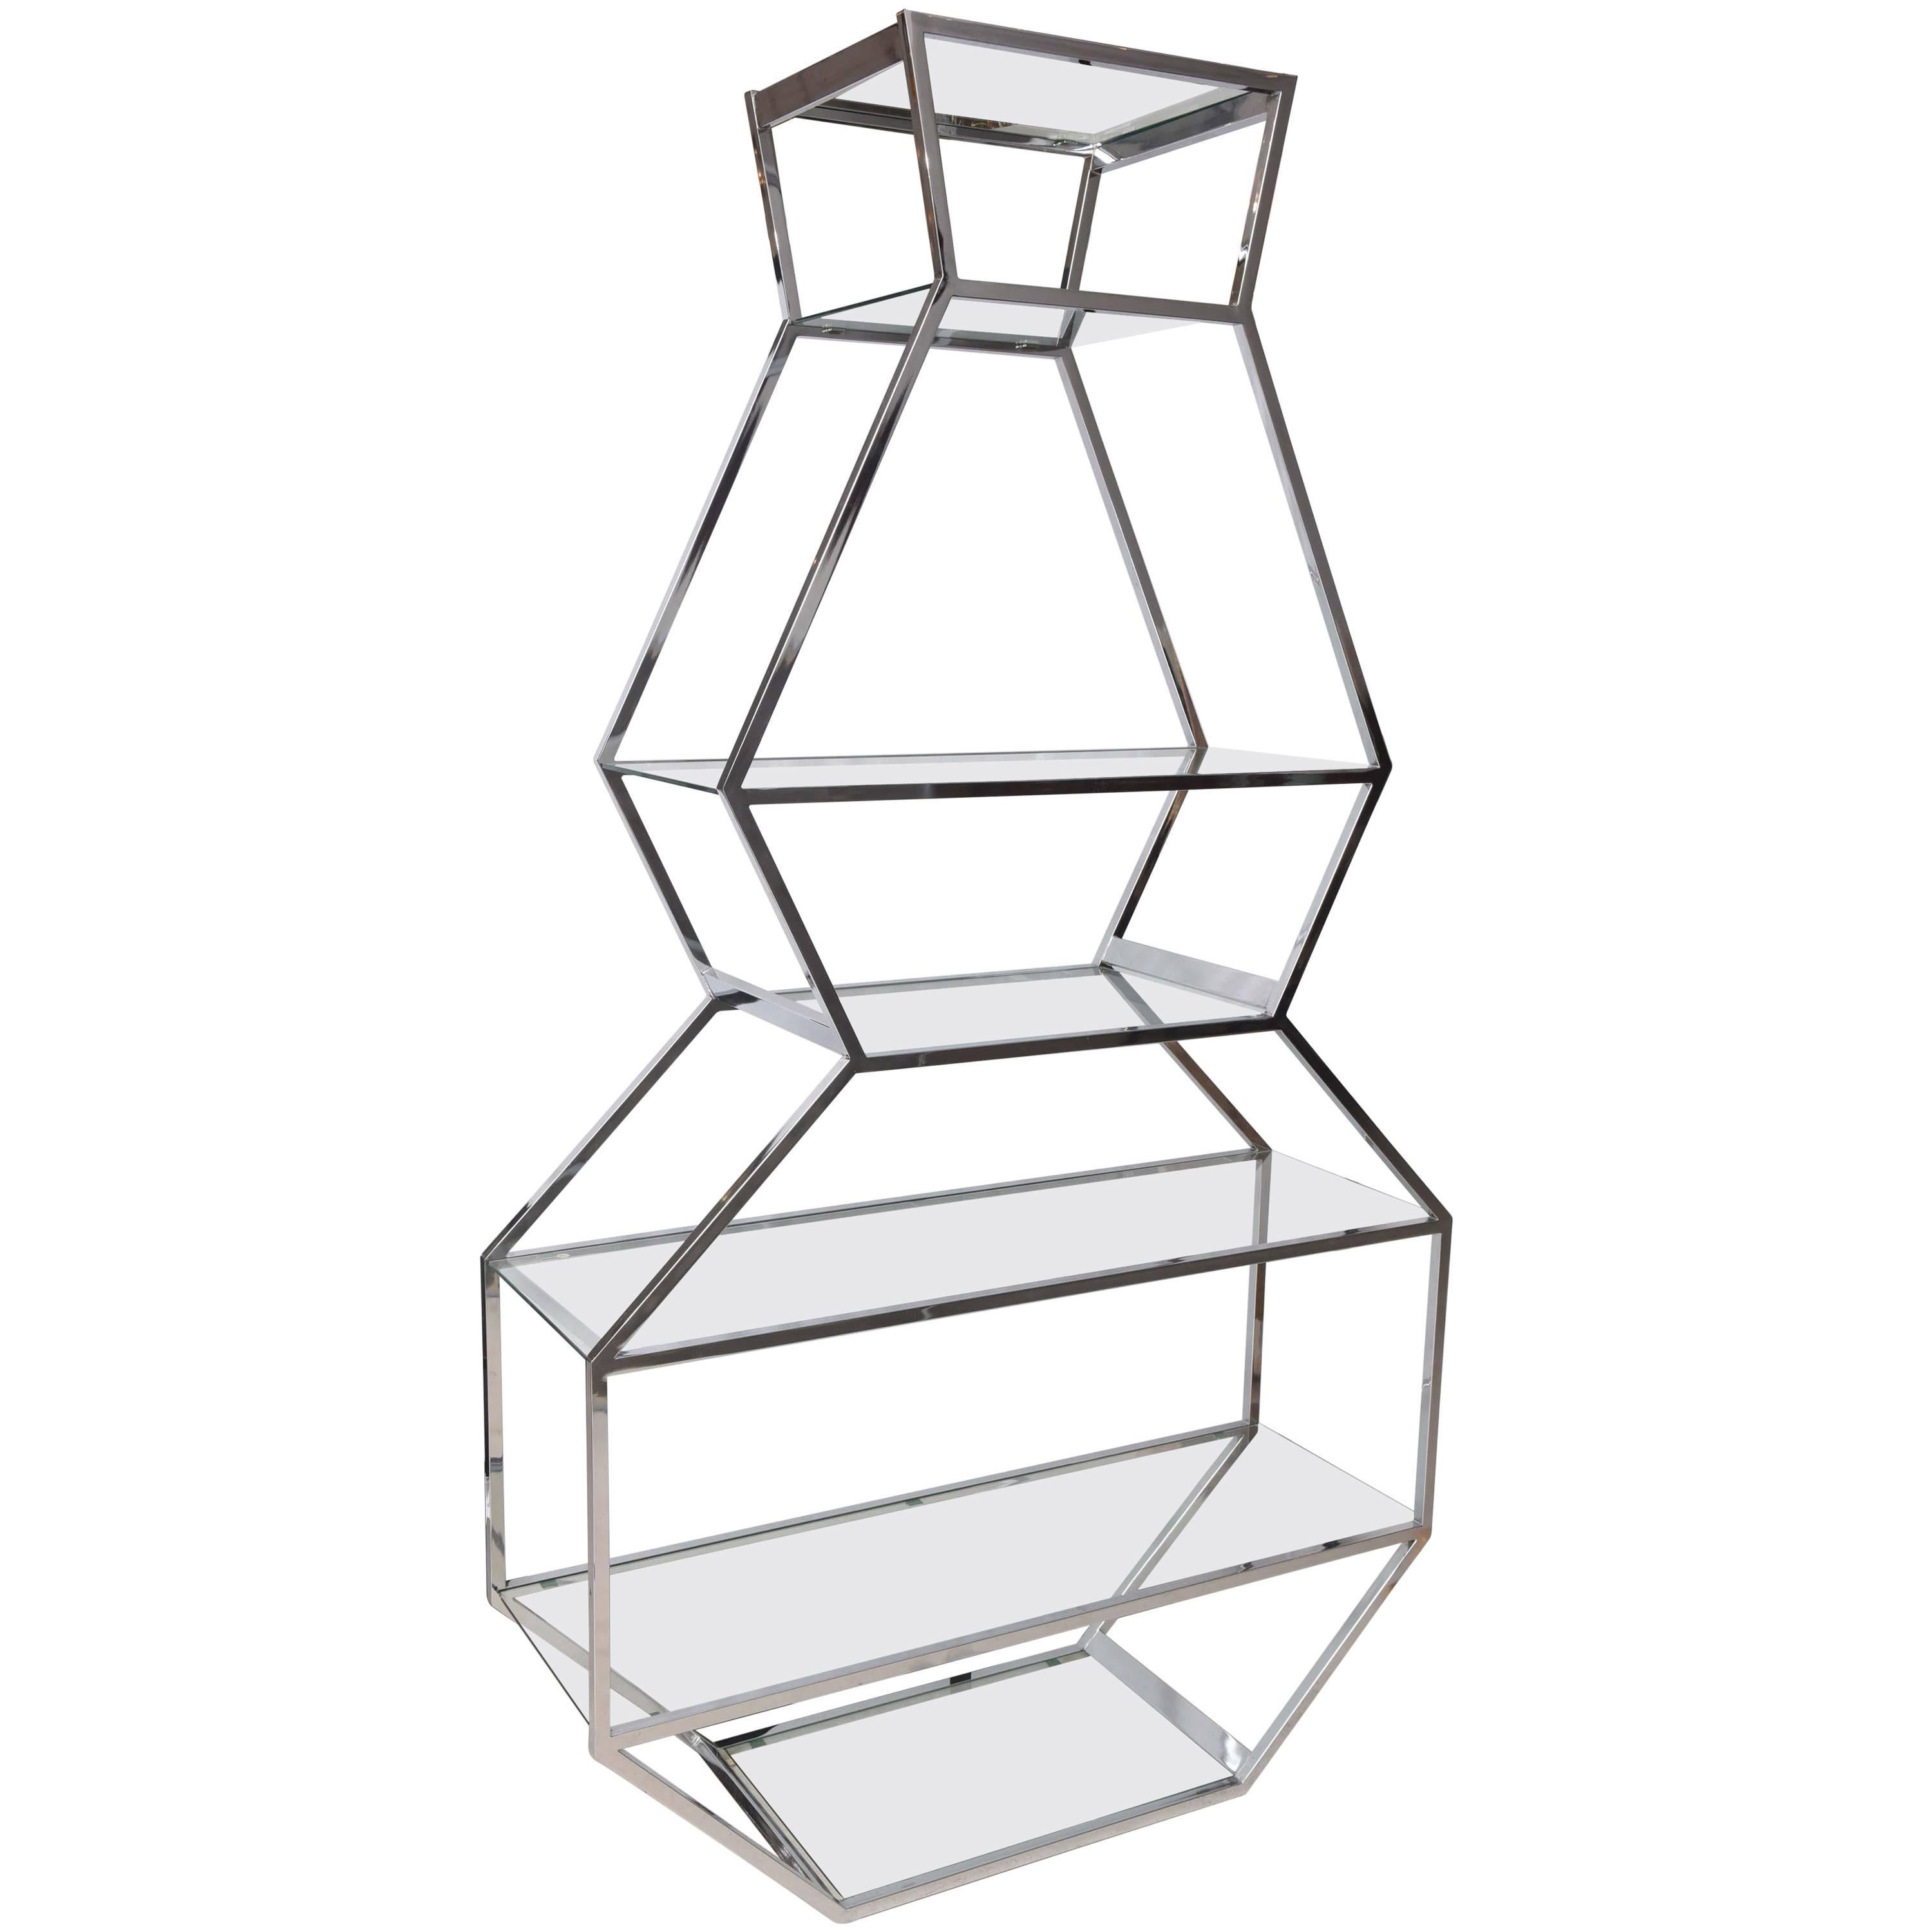  Chrome and Glass Etagere in the Manner of Milo Baughman